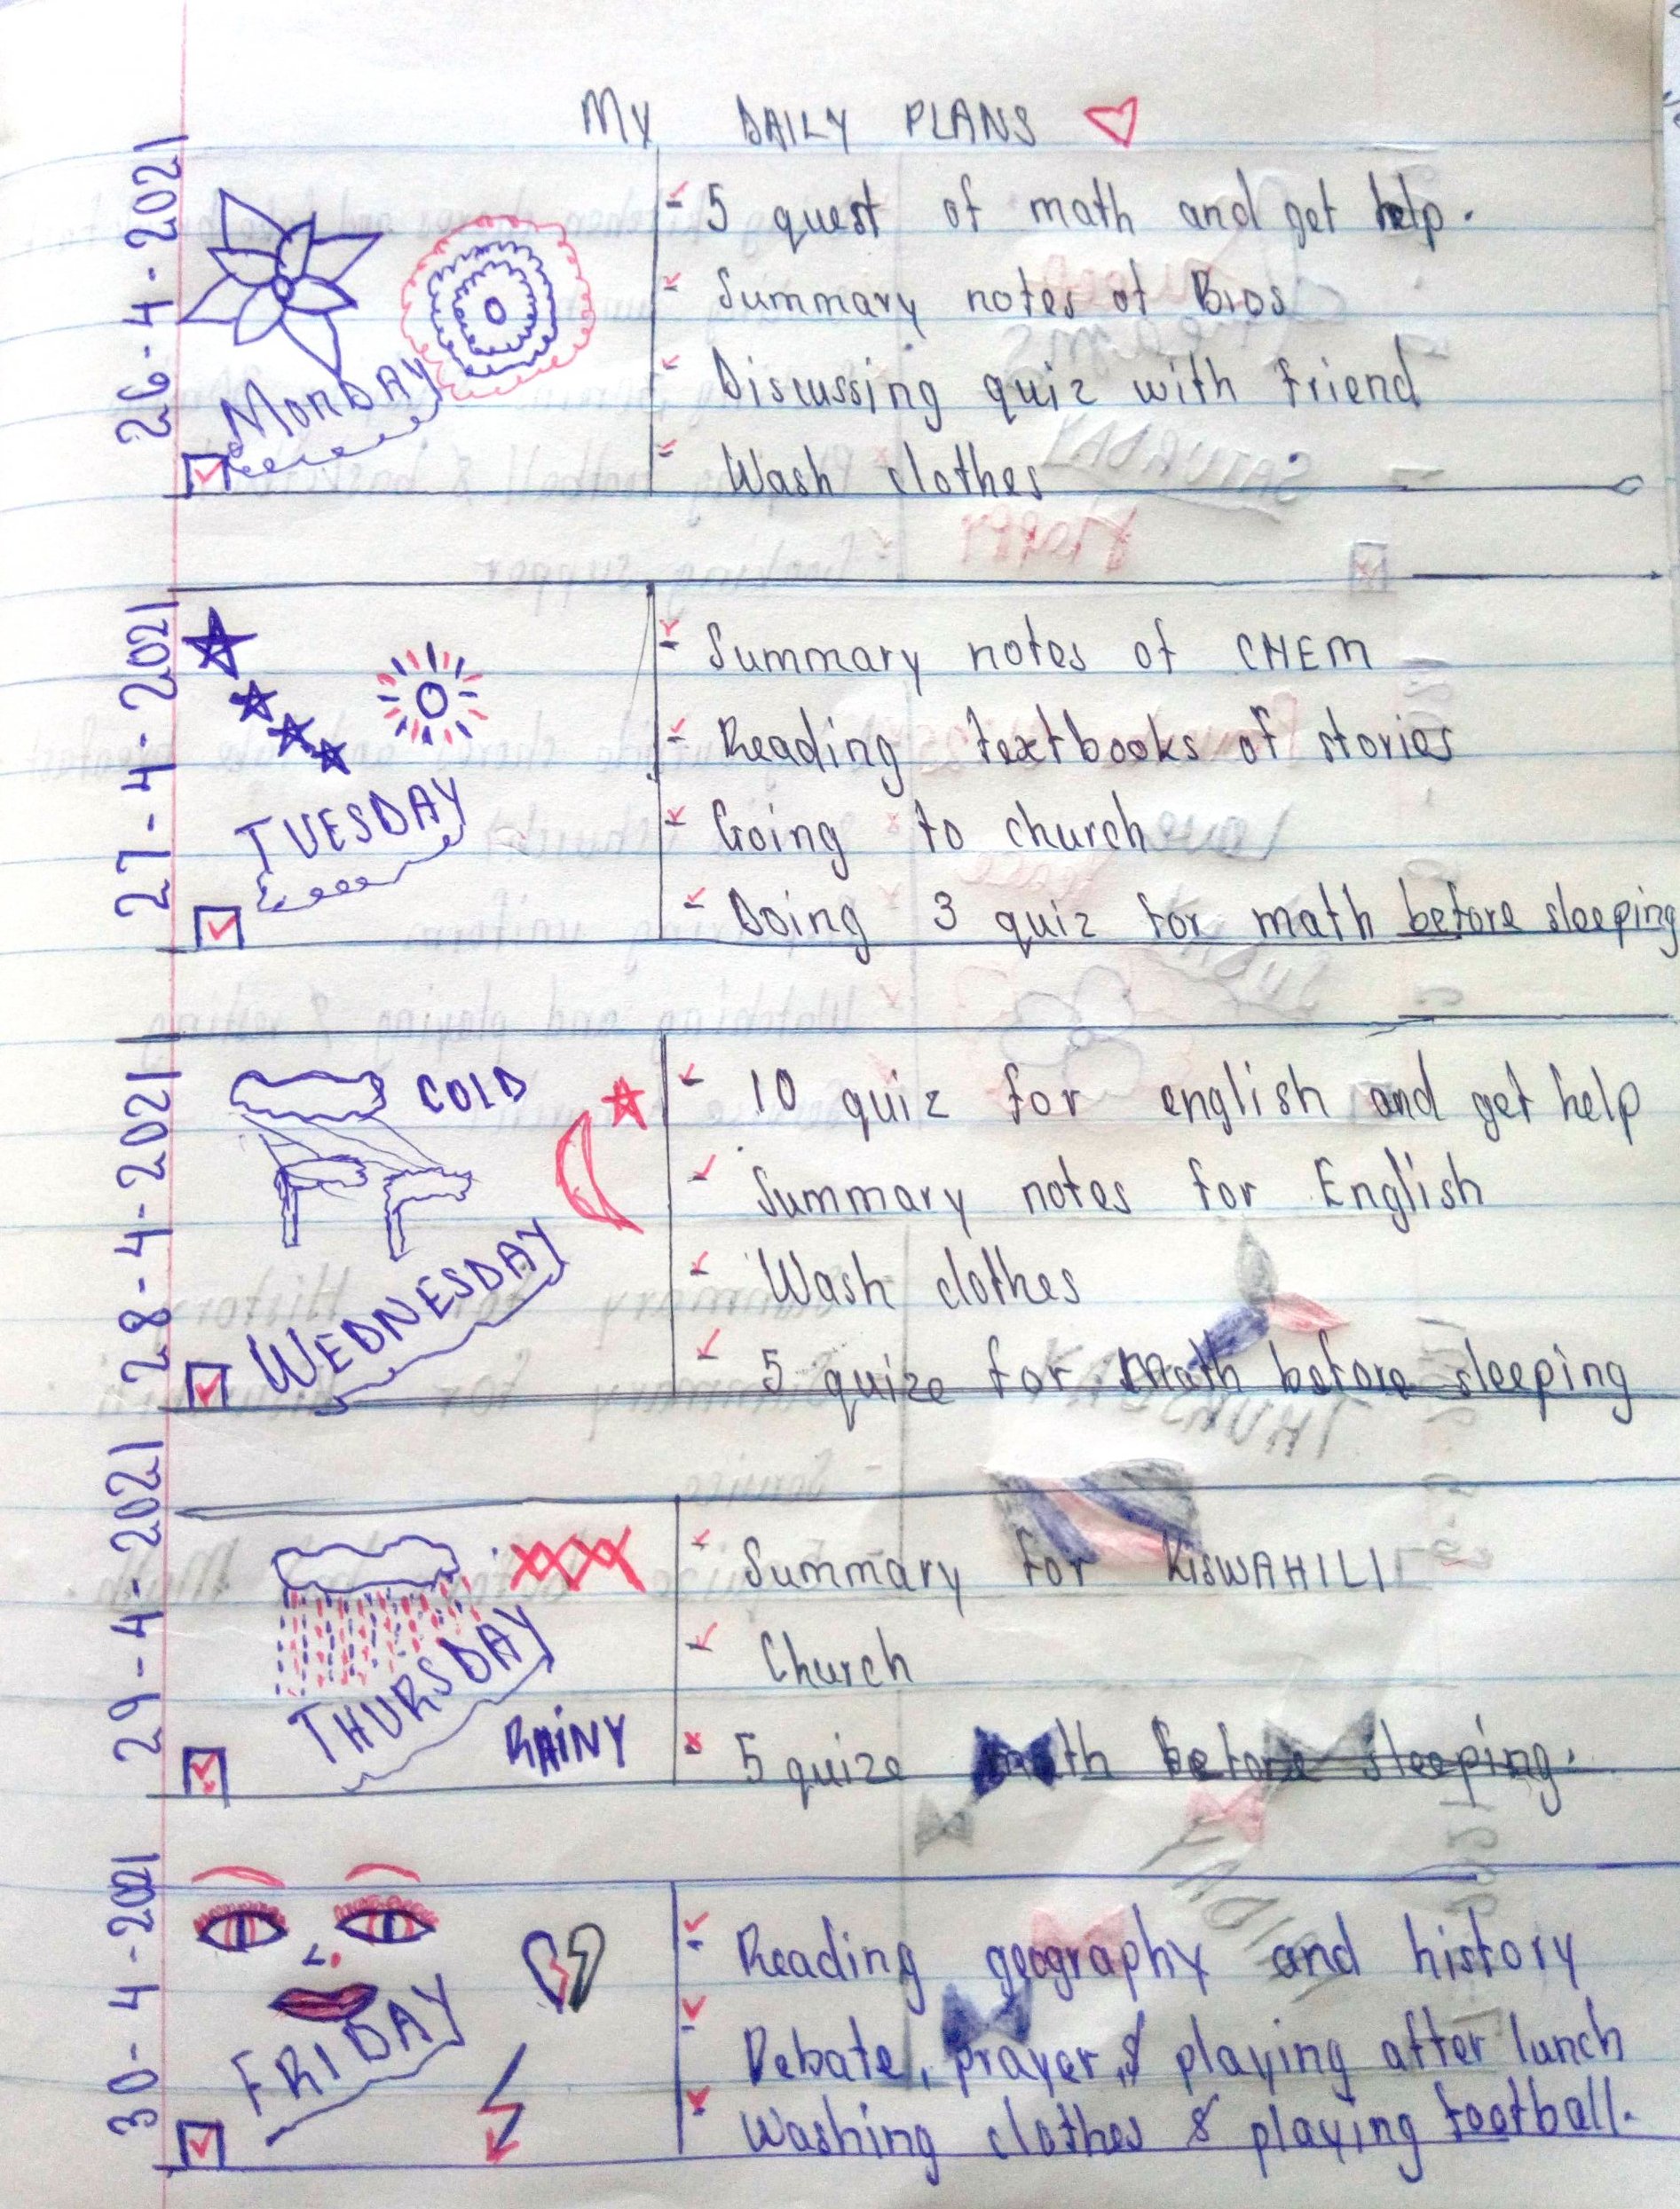 A notebook page displays a week's worth of goals handwritten by a student.